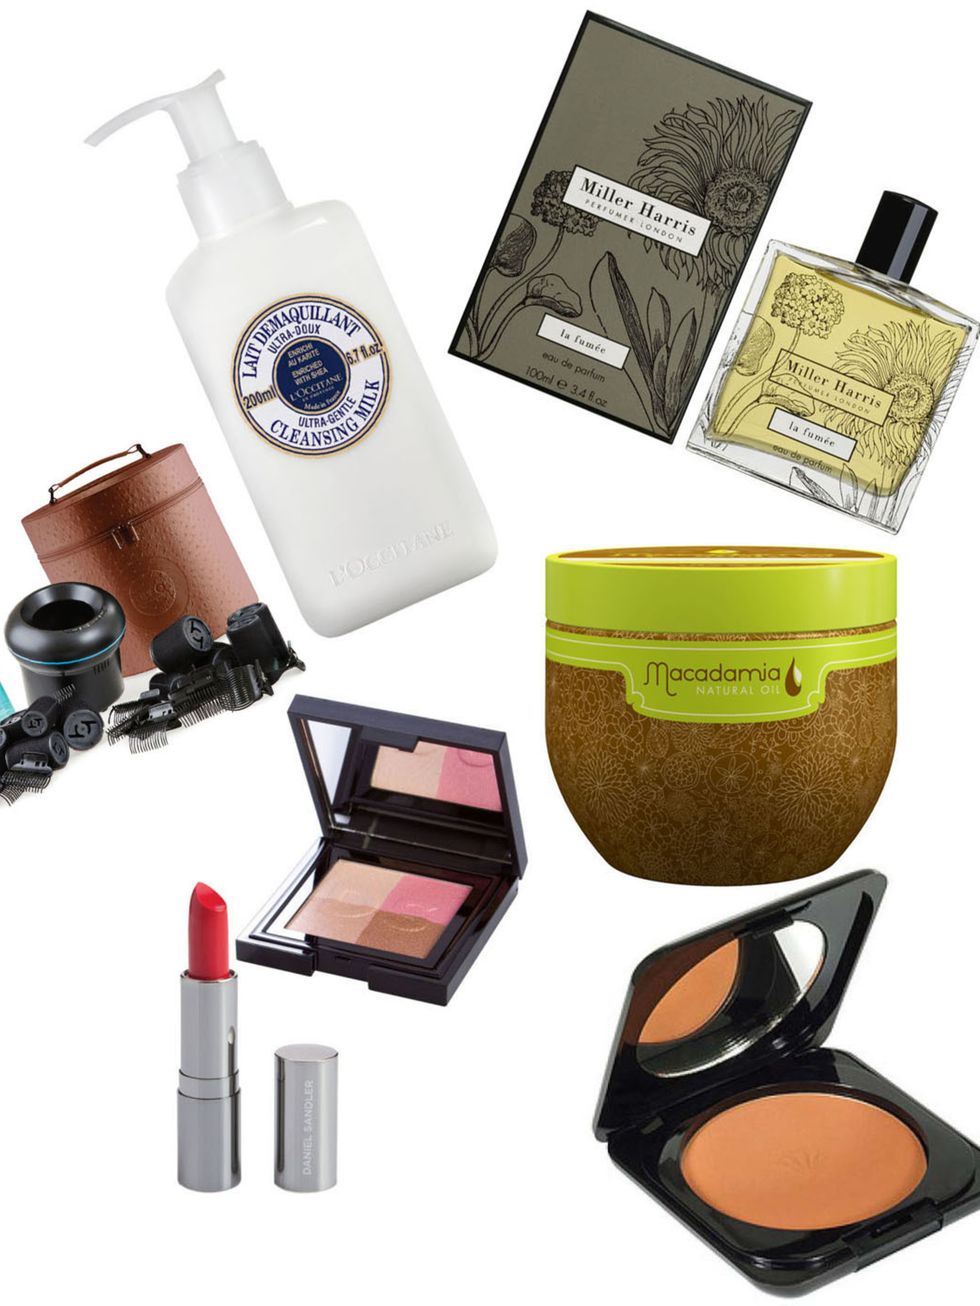 <p>This month its time to wave goodbye to <a href="http://www.elleuk.com/beauty/make-up-skin/make-up-features/50-best-summer-limited-edition-beauty-buys-elle-beauty-team-summer-products">summer</a> and embrace your new <a href="http://www.elleuk.com/beau